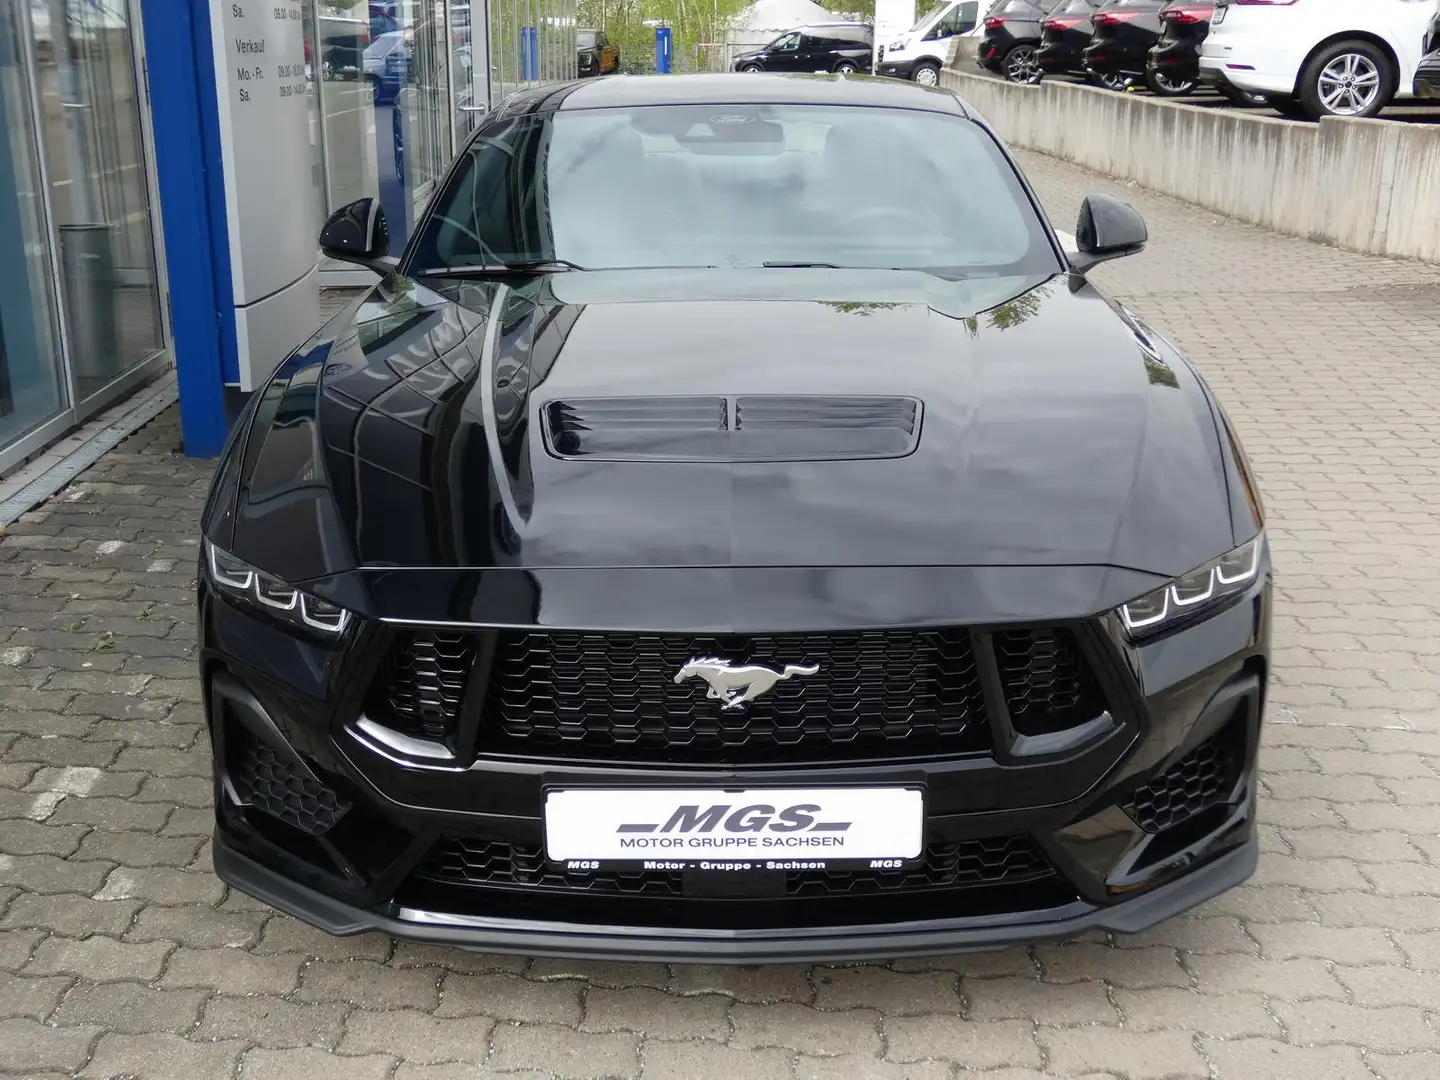 Ford Mustang 5.0 #V8 #NEUES MODELL #LED #NAVI #KLAPPE crna - 2